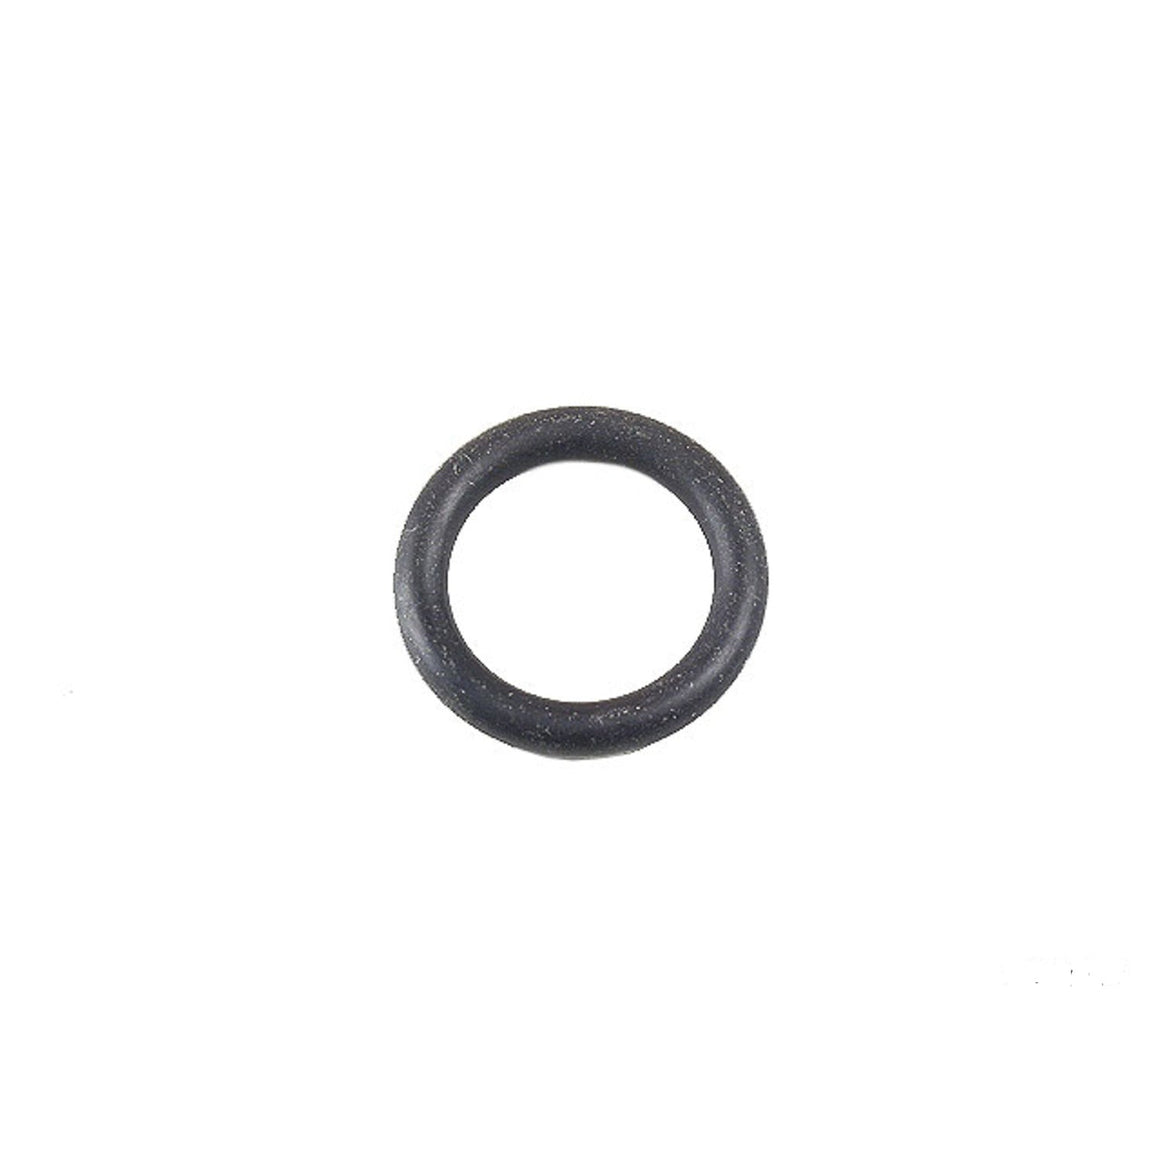 (New) 911 Fuel Injector O-Ring - 1974-83